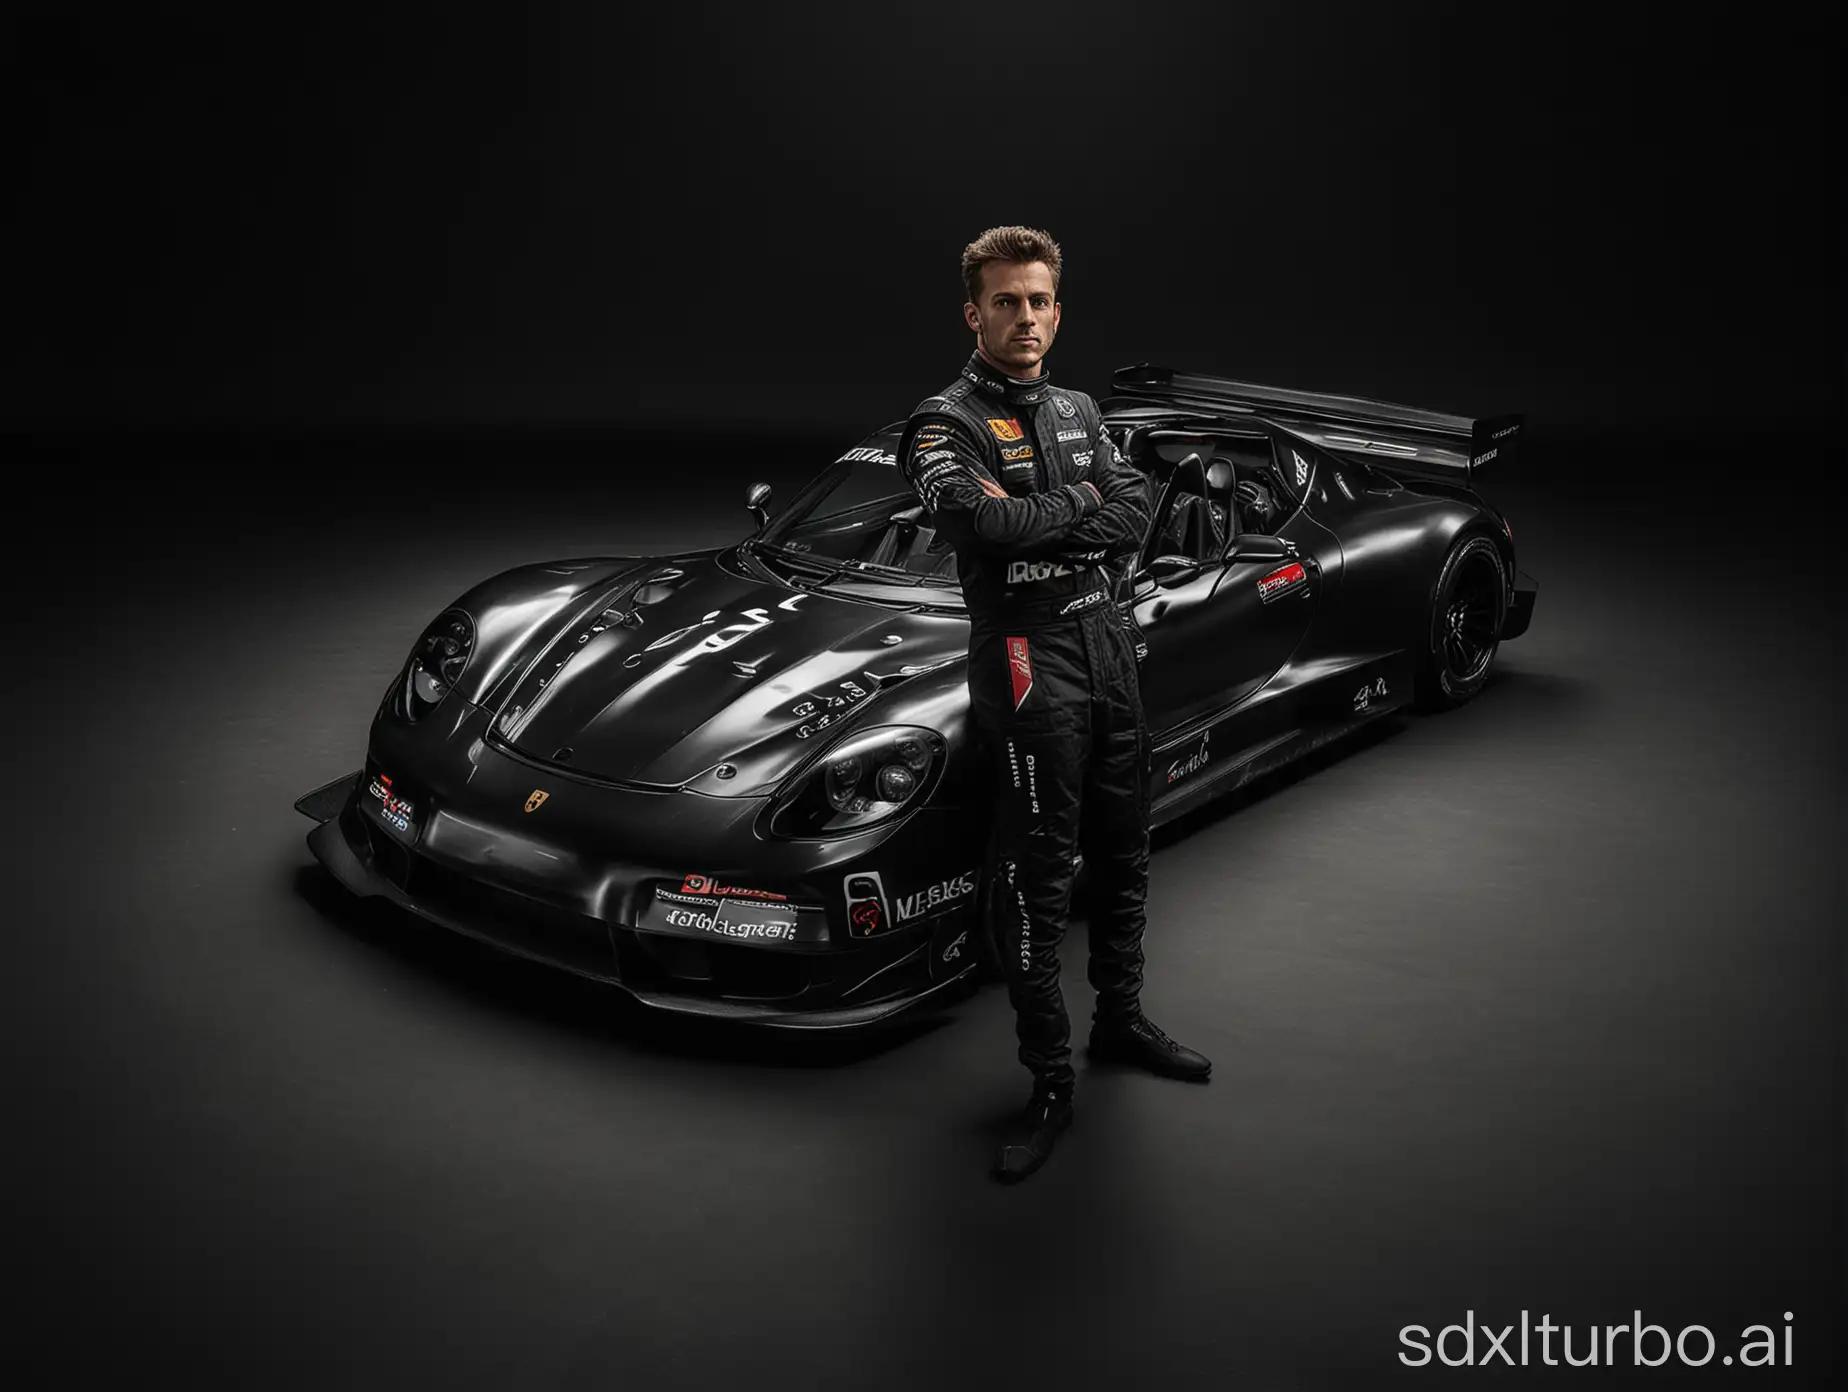 On a black background, a man racer in a black racing suit on a black Porsche